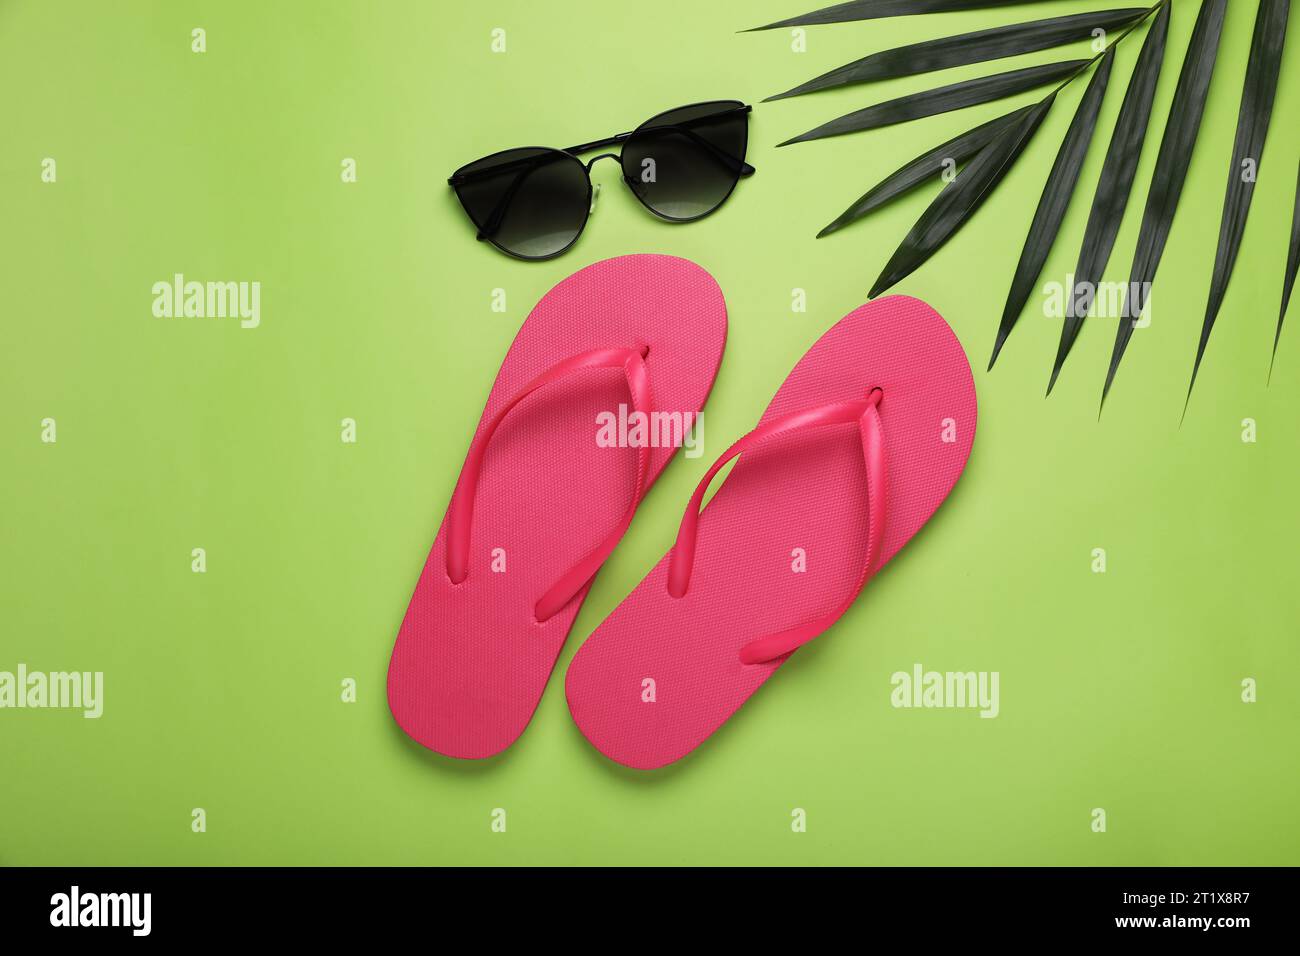 Stylish pink flip flops, sunglasses and palm leaf on light green background, flat lay Stock Photo